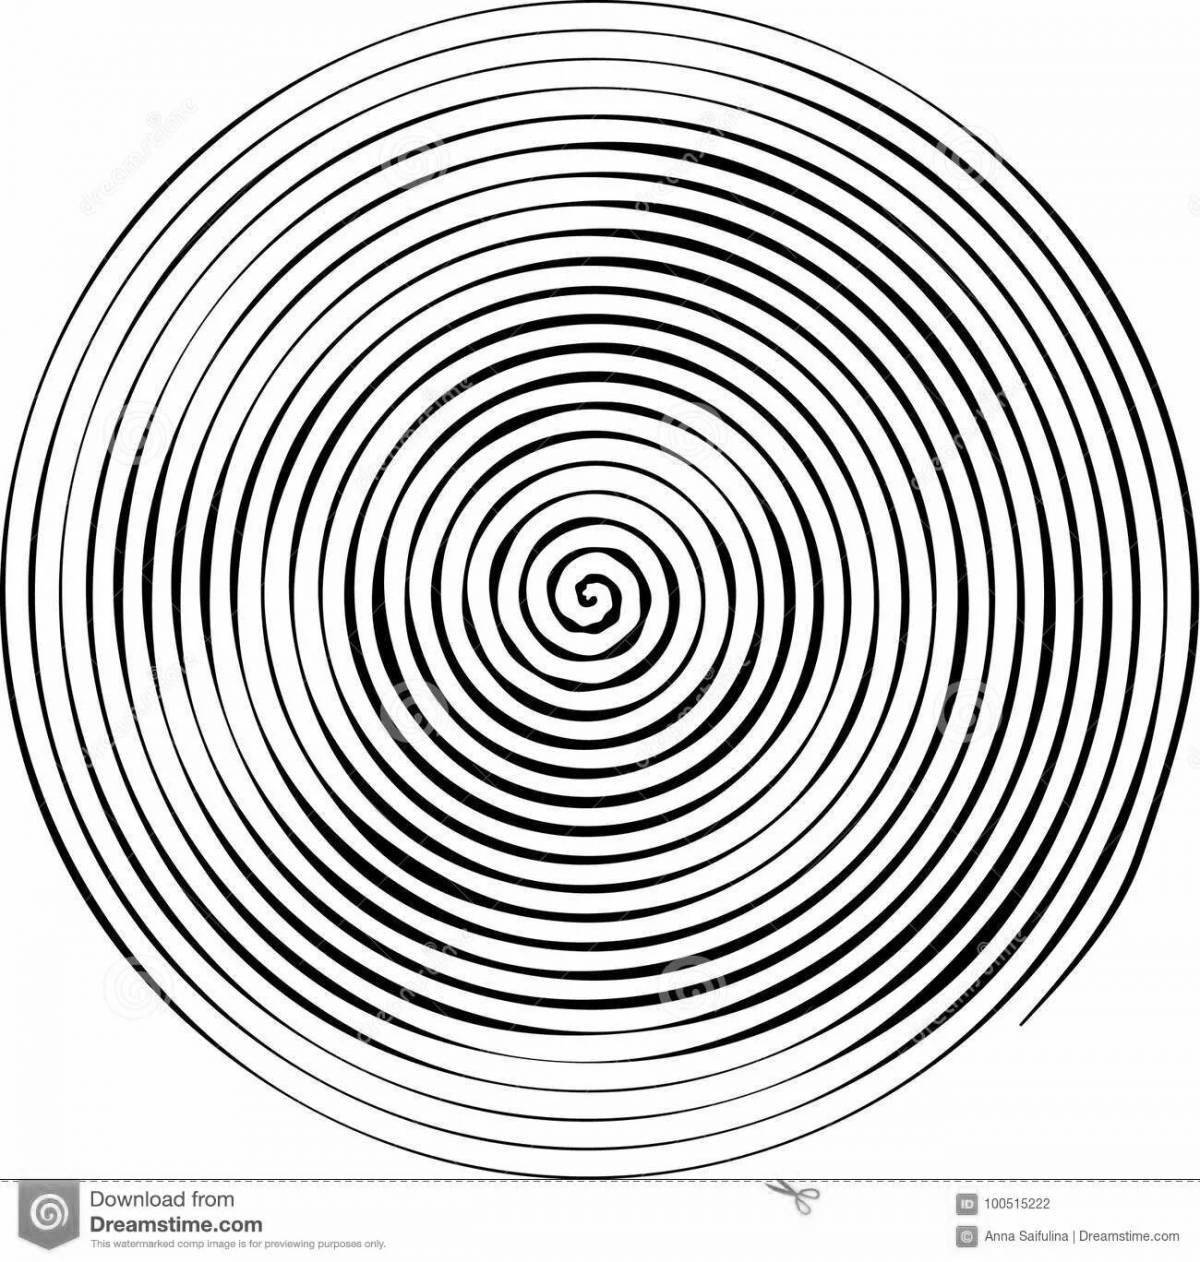 Intricate spiral coloring page